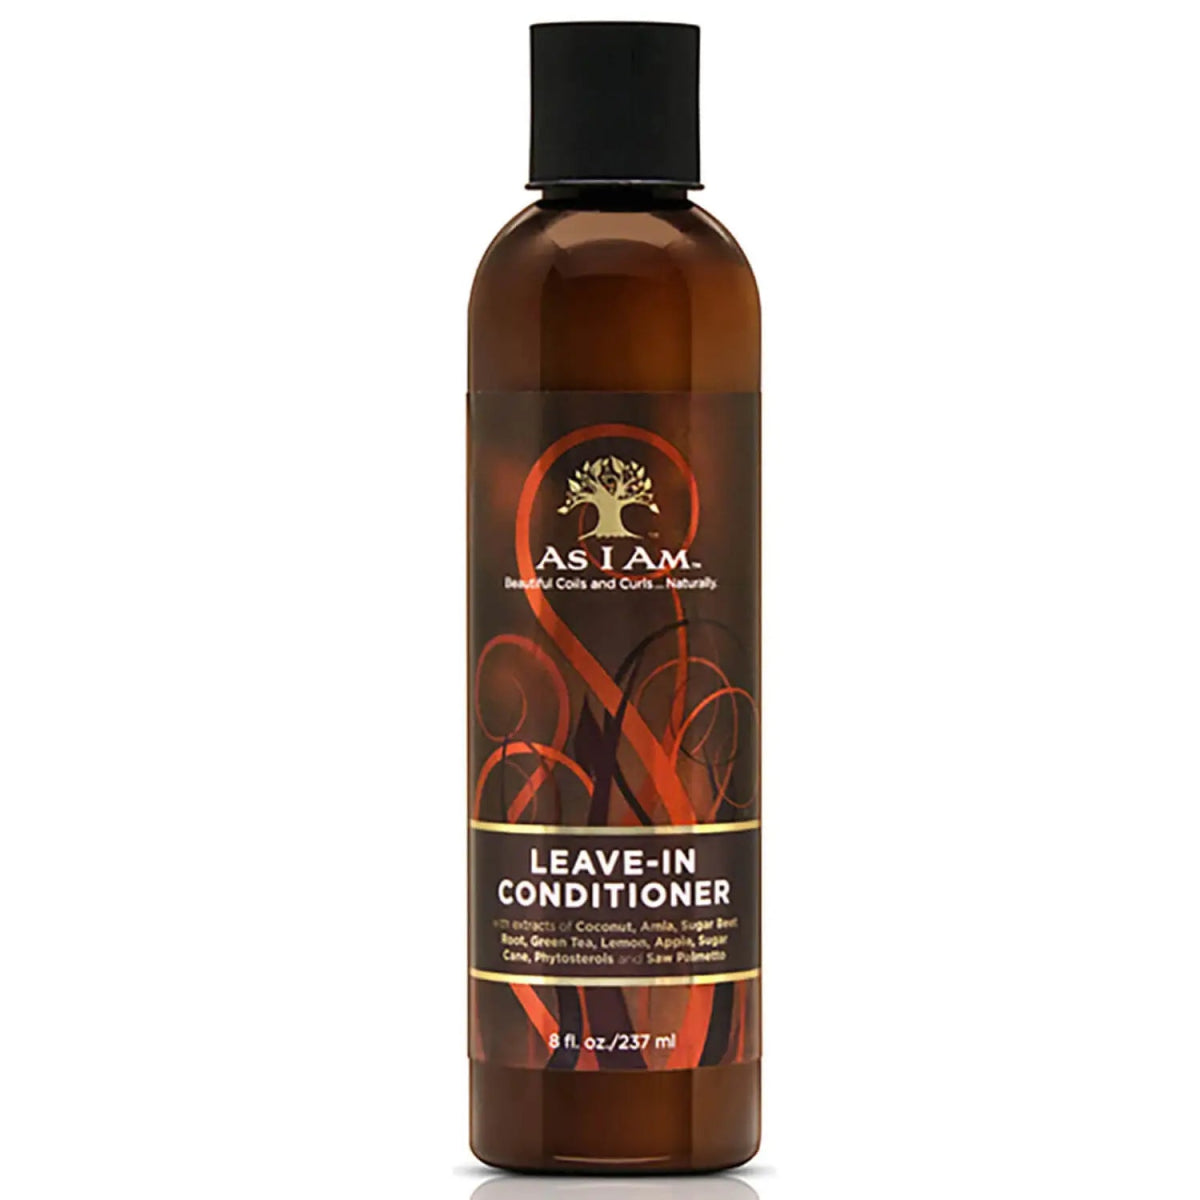 As I Am Leave-In Conditioner - Southwestsix Cosmetics As I Am Leave-In Conditioner Leave-in Conditioner As I Am Southwestsix Cosmetics As I Am Leave-In Conditioner